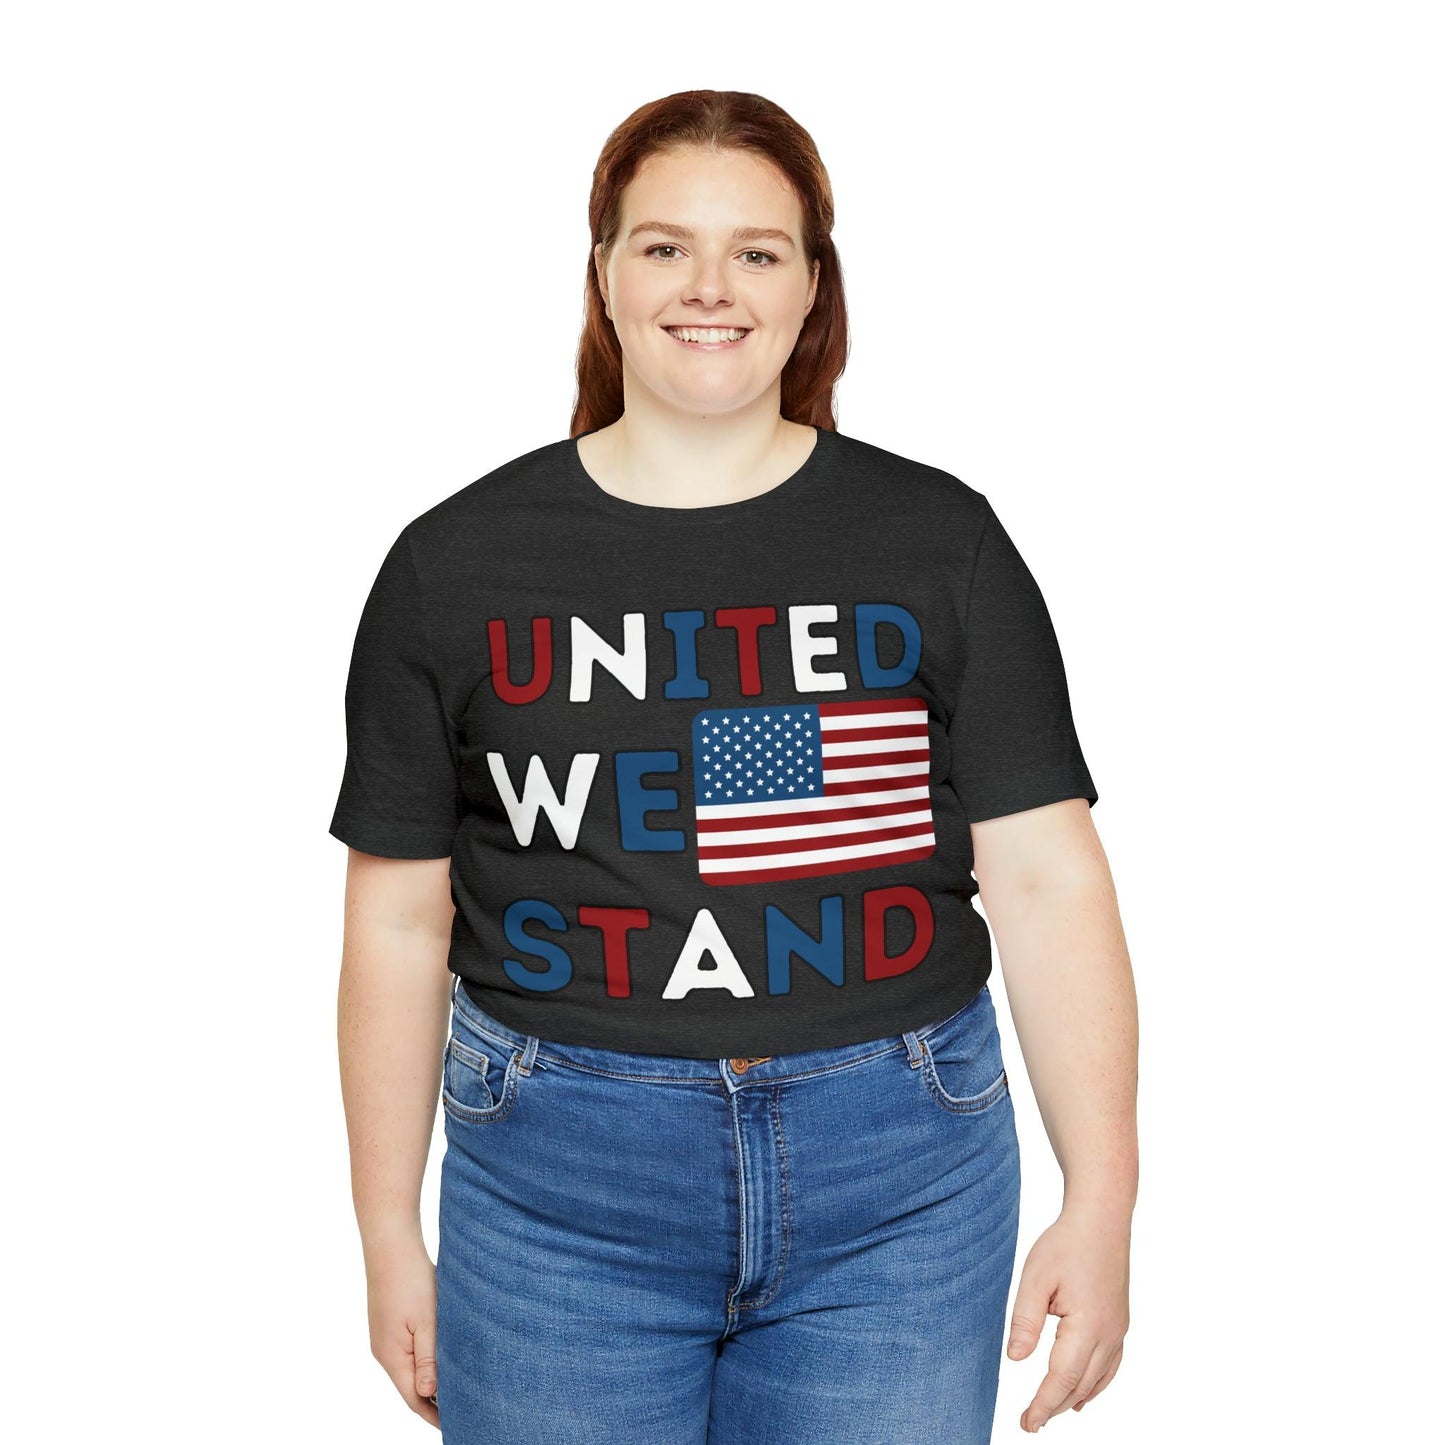 United We Stand shirt, USA Flag shirt, 4th of July shirt, Independence Day shirt